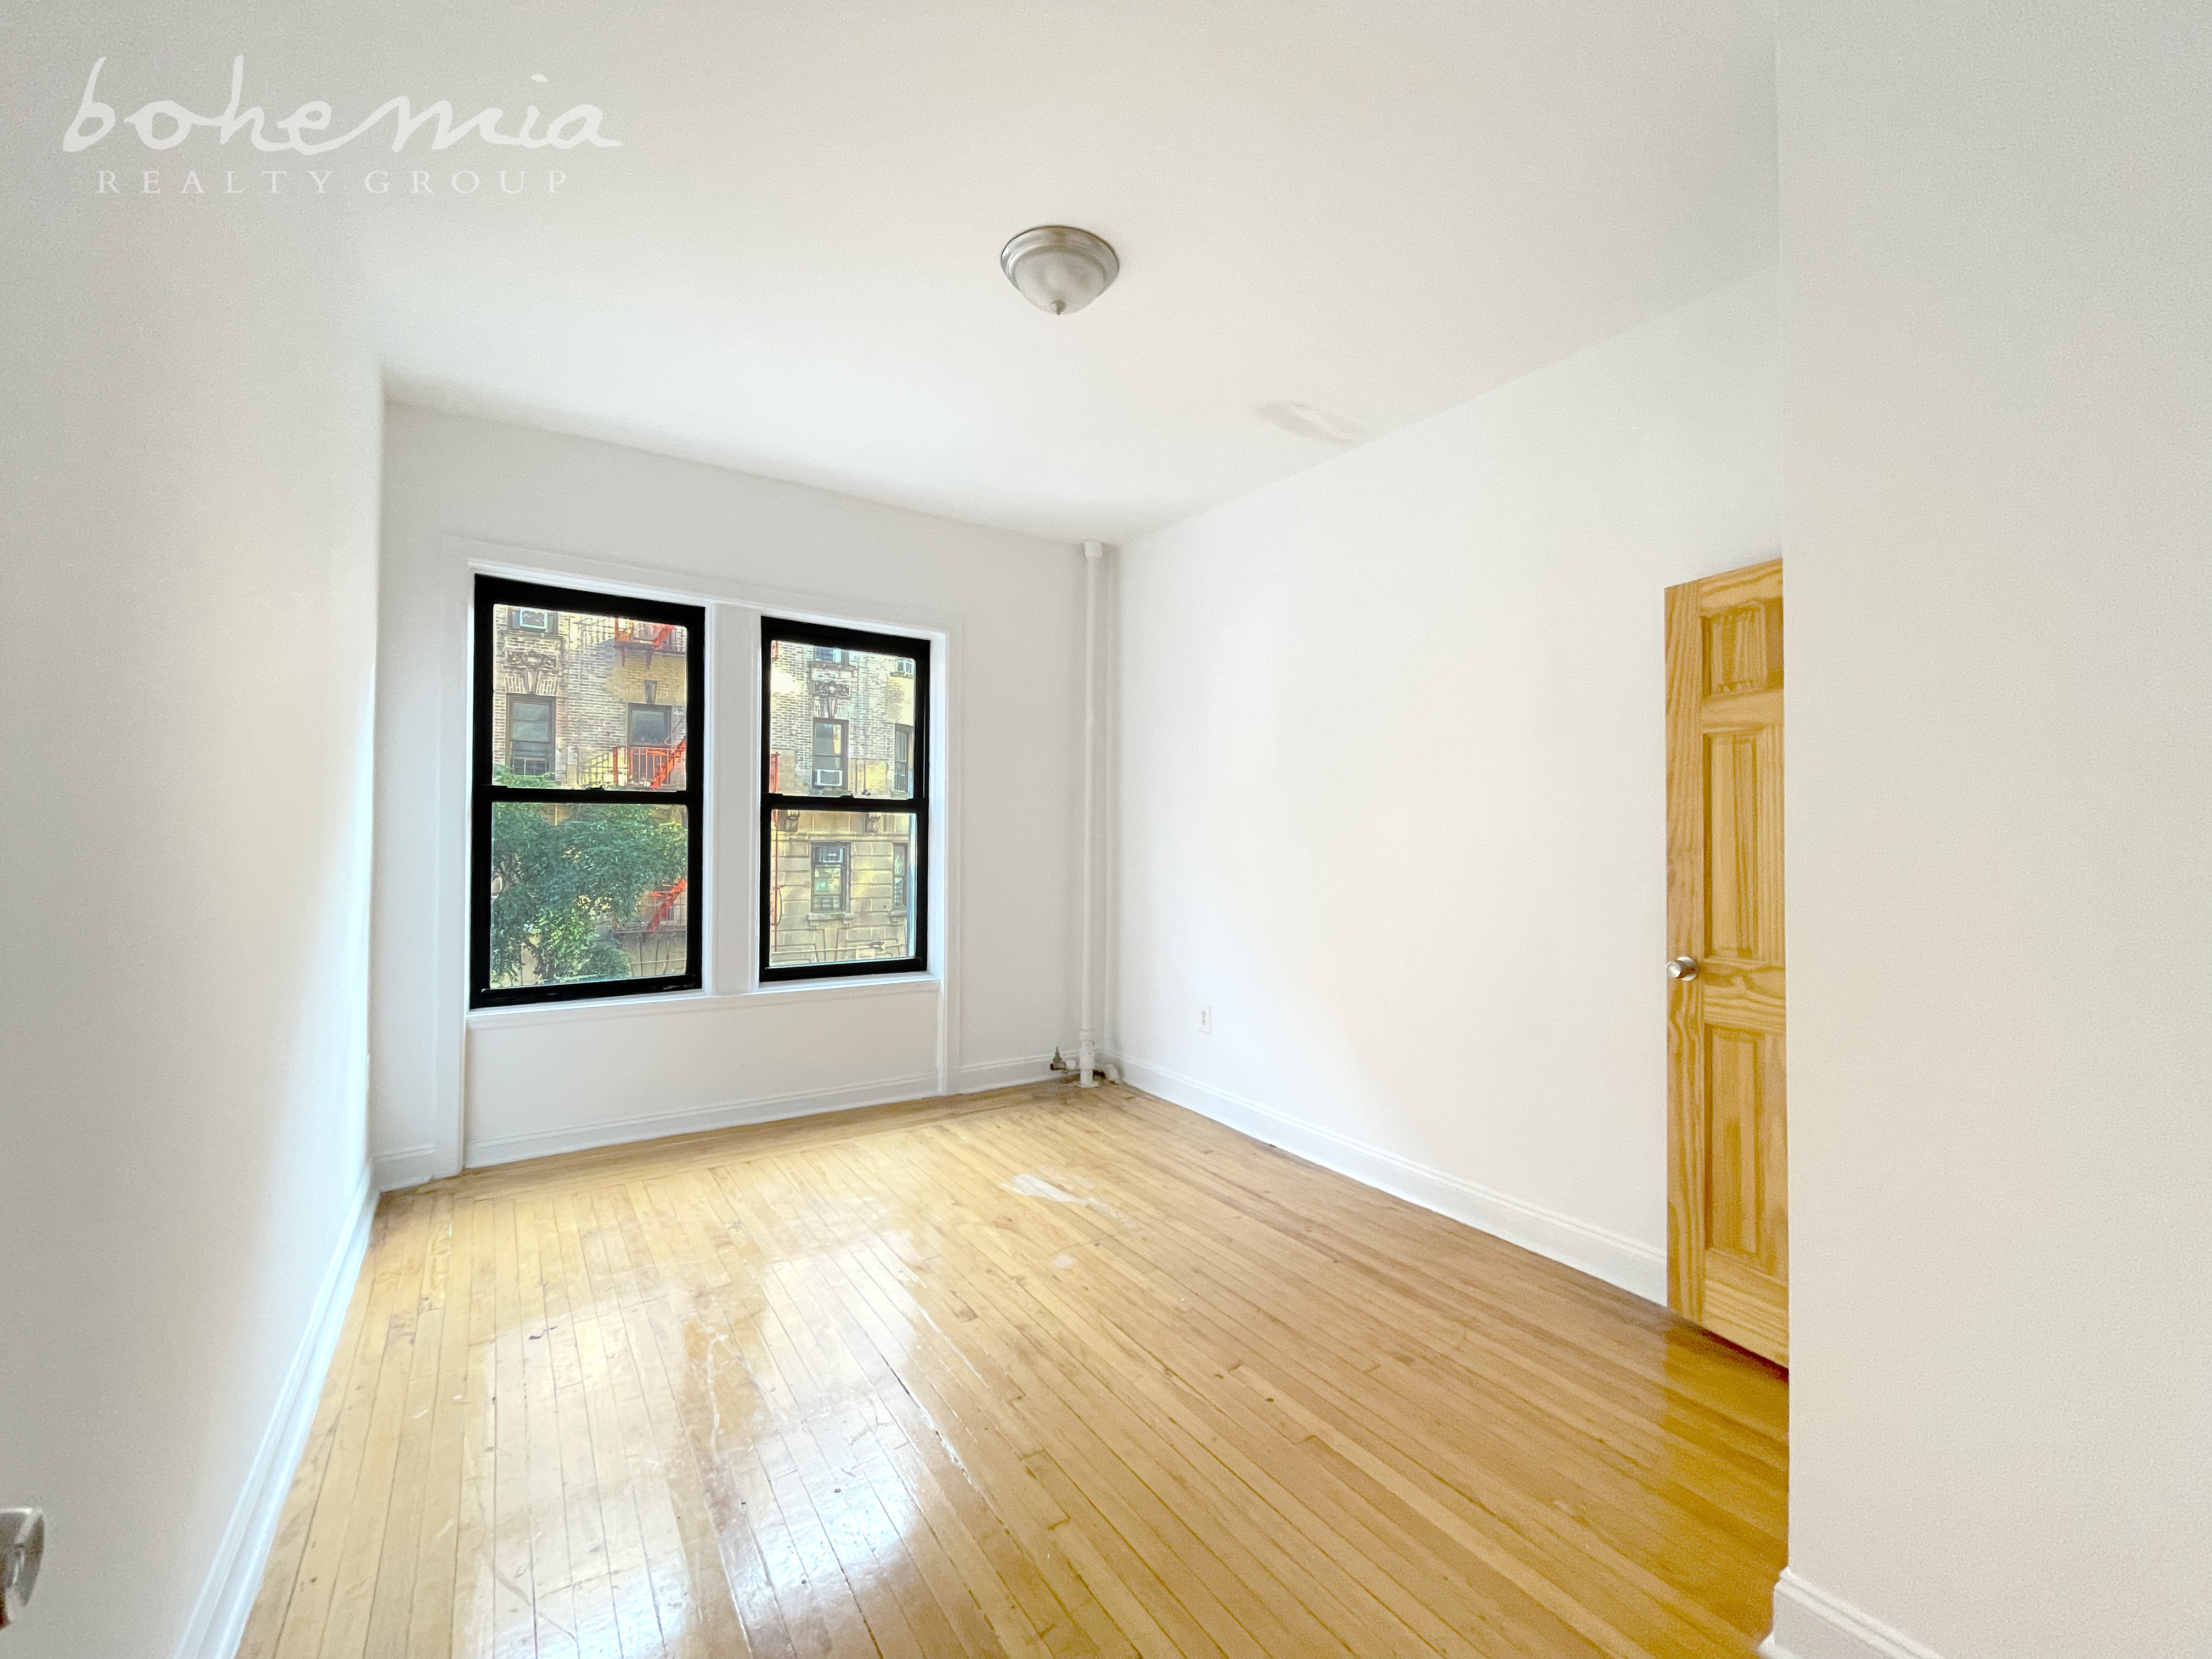 607 West 139th Street 2-A, Hamilton Heights, Upper Manhattan, NYC - 4 Bedrooms  
2 Bathrooms  
6 Rooms - 